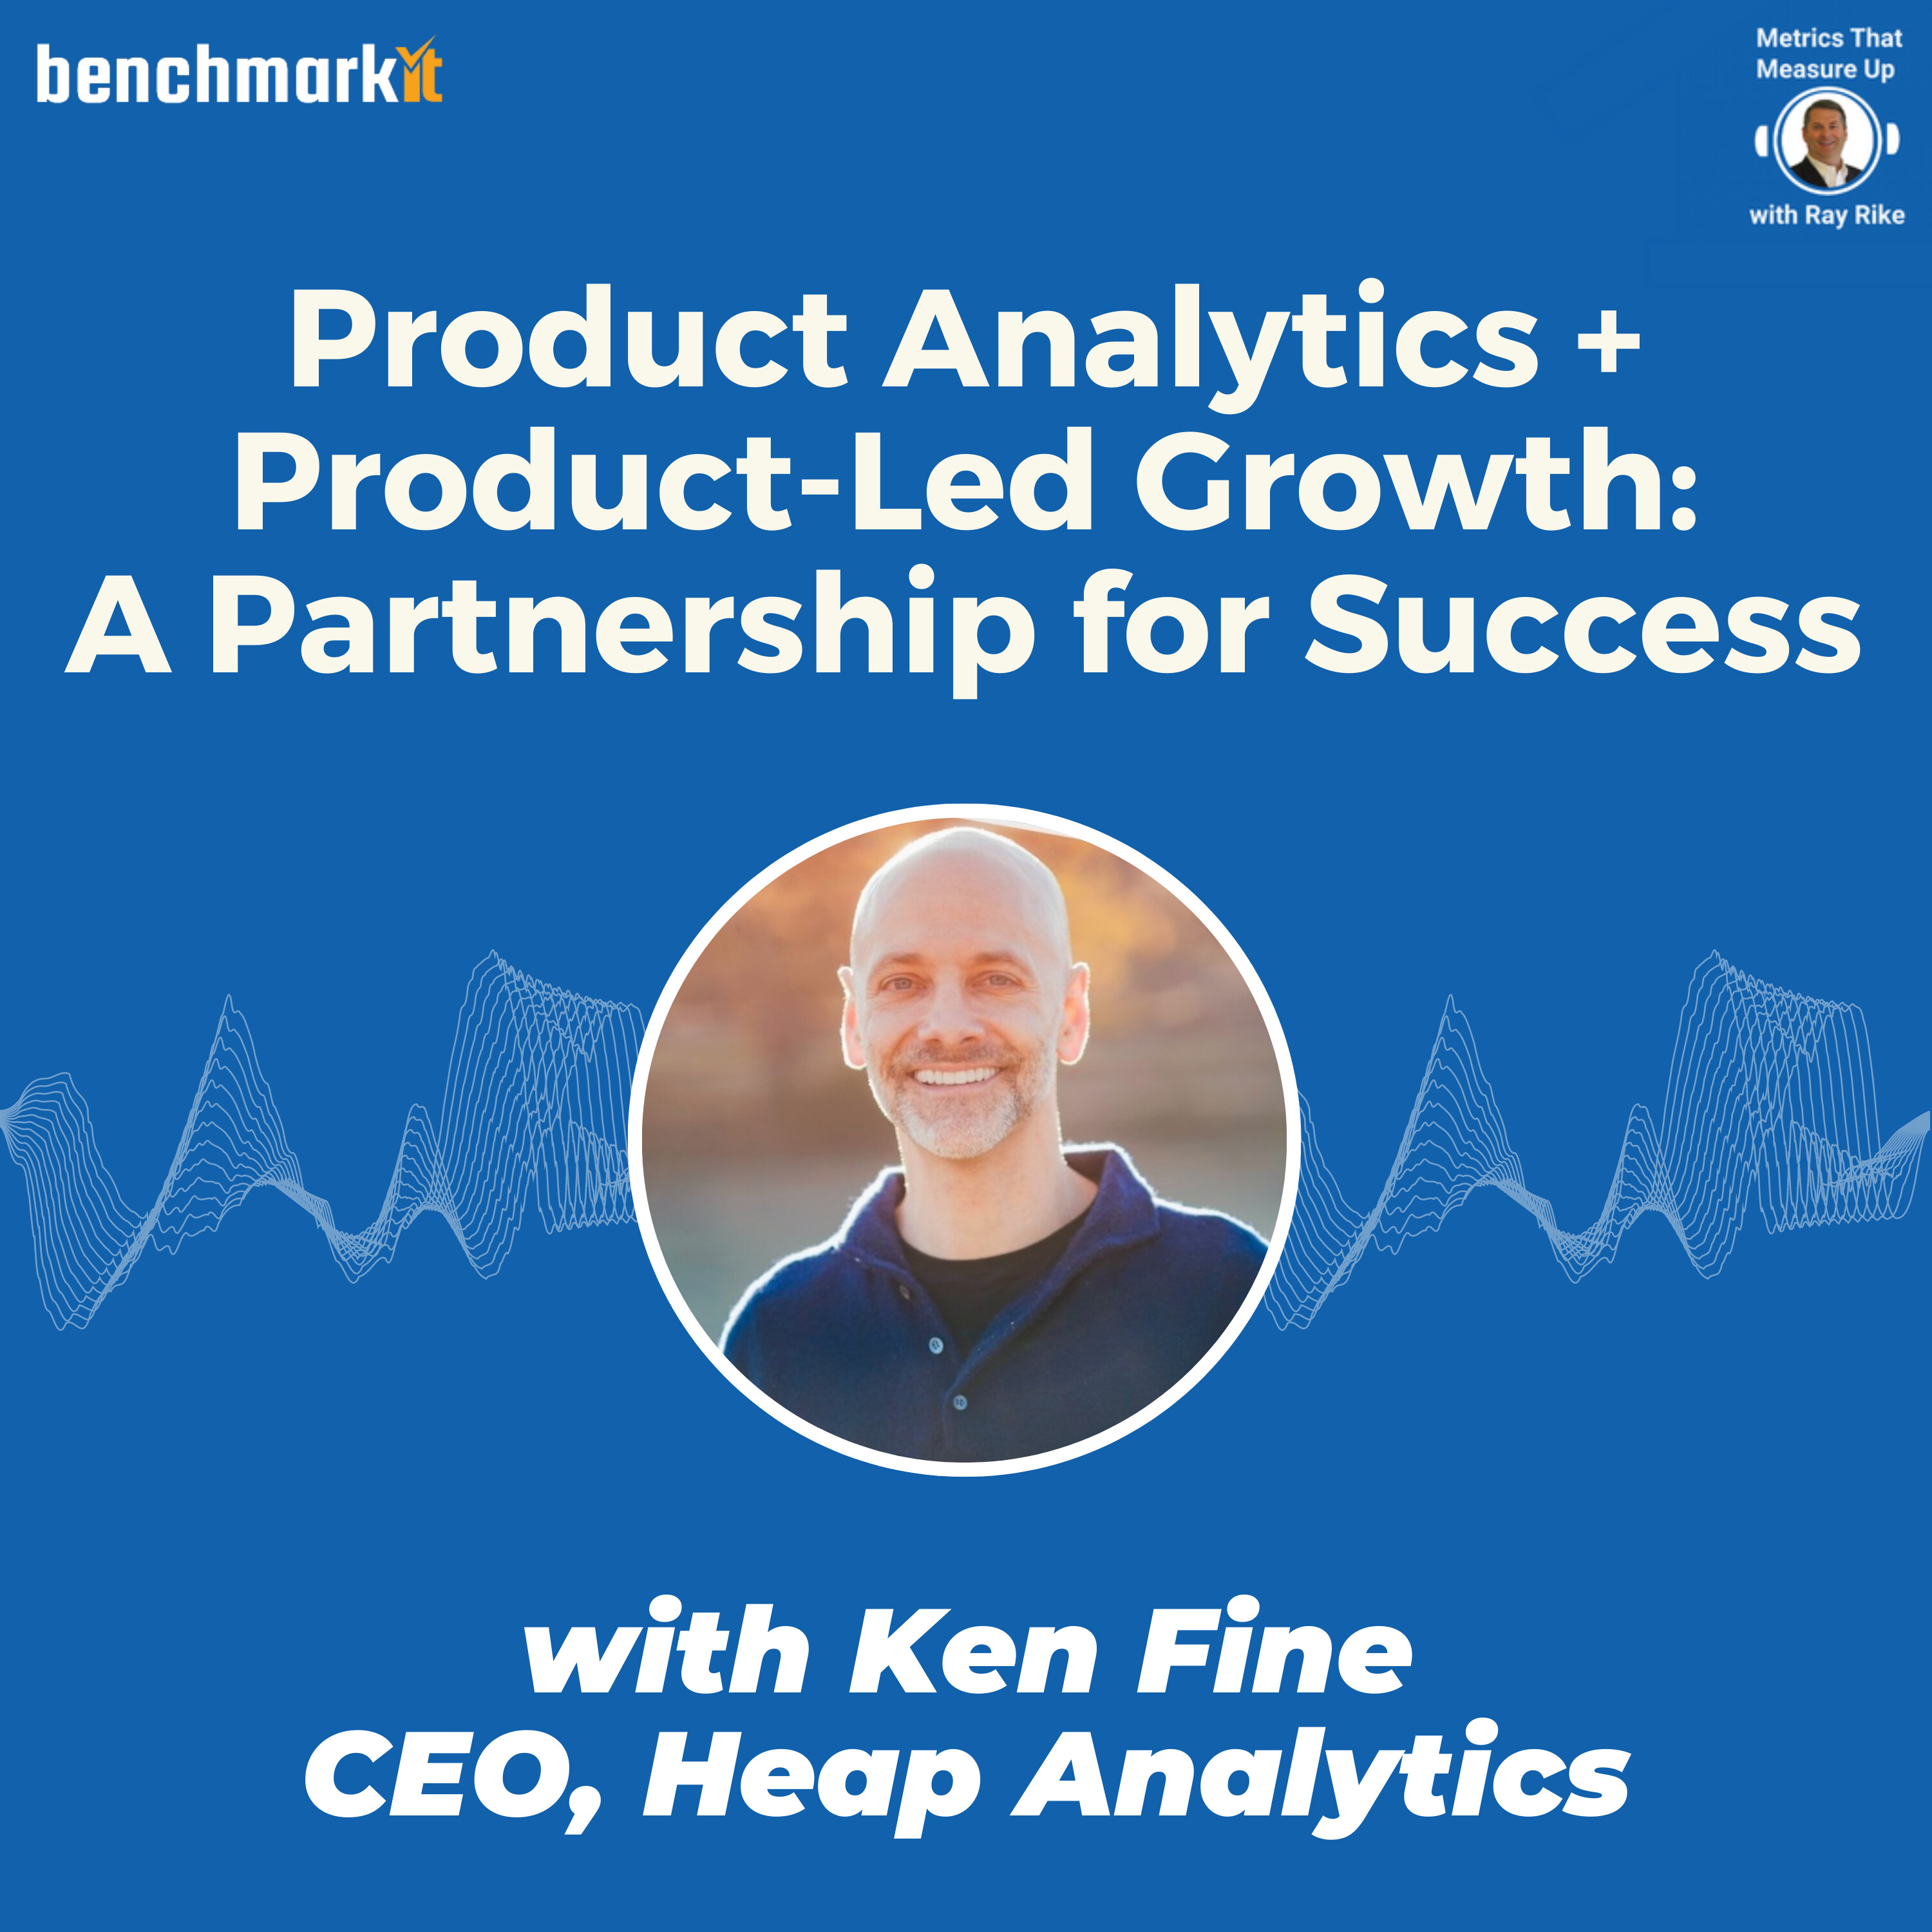 Product Analytics + Product Led Growth = A Partnership for Success - with Ken Fine, CEO Heap Analytics